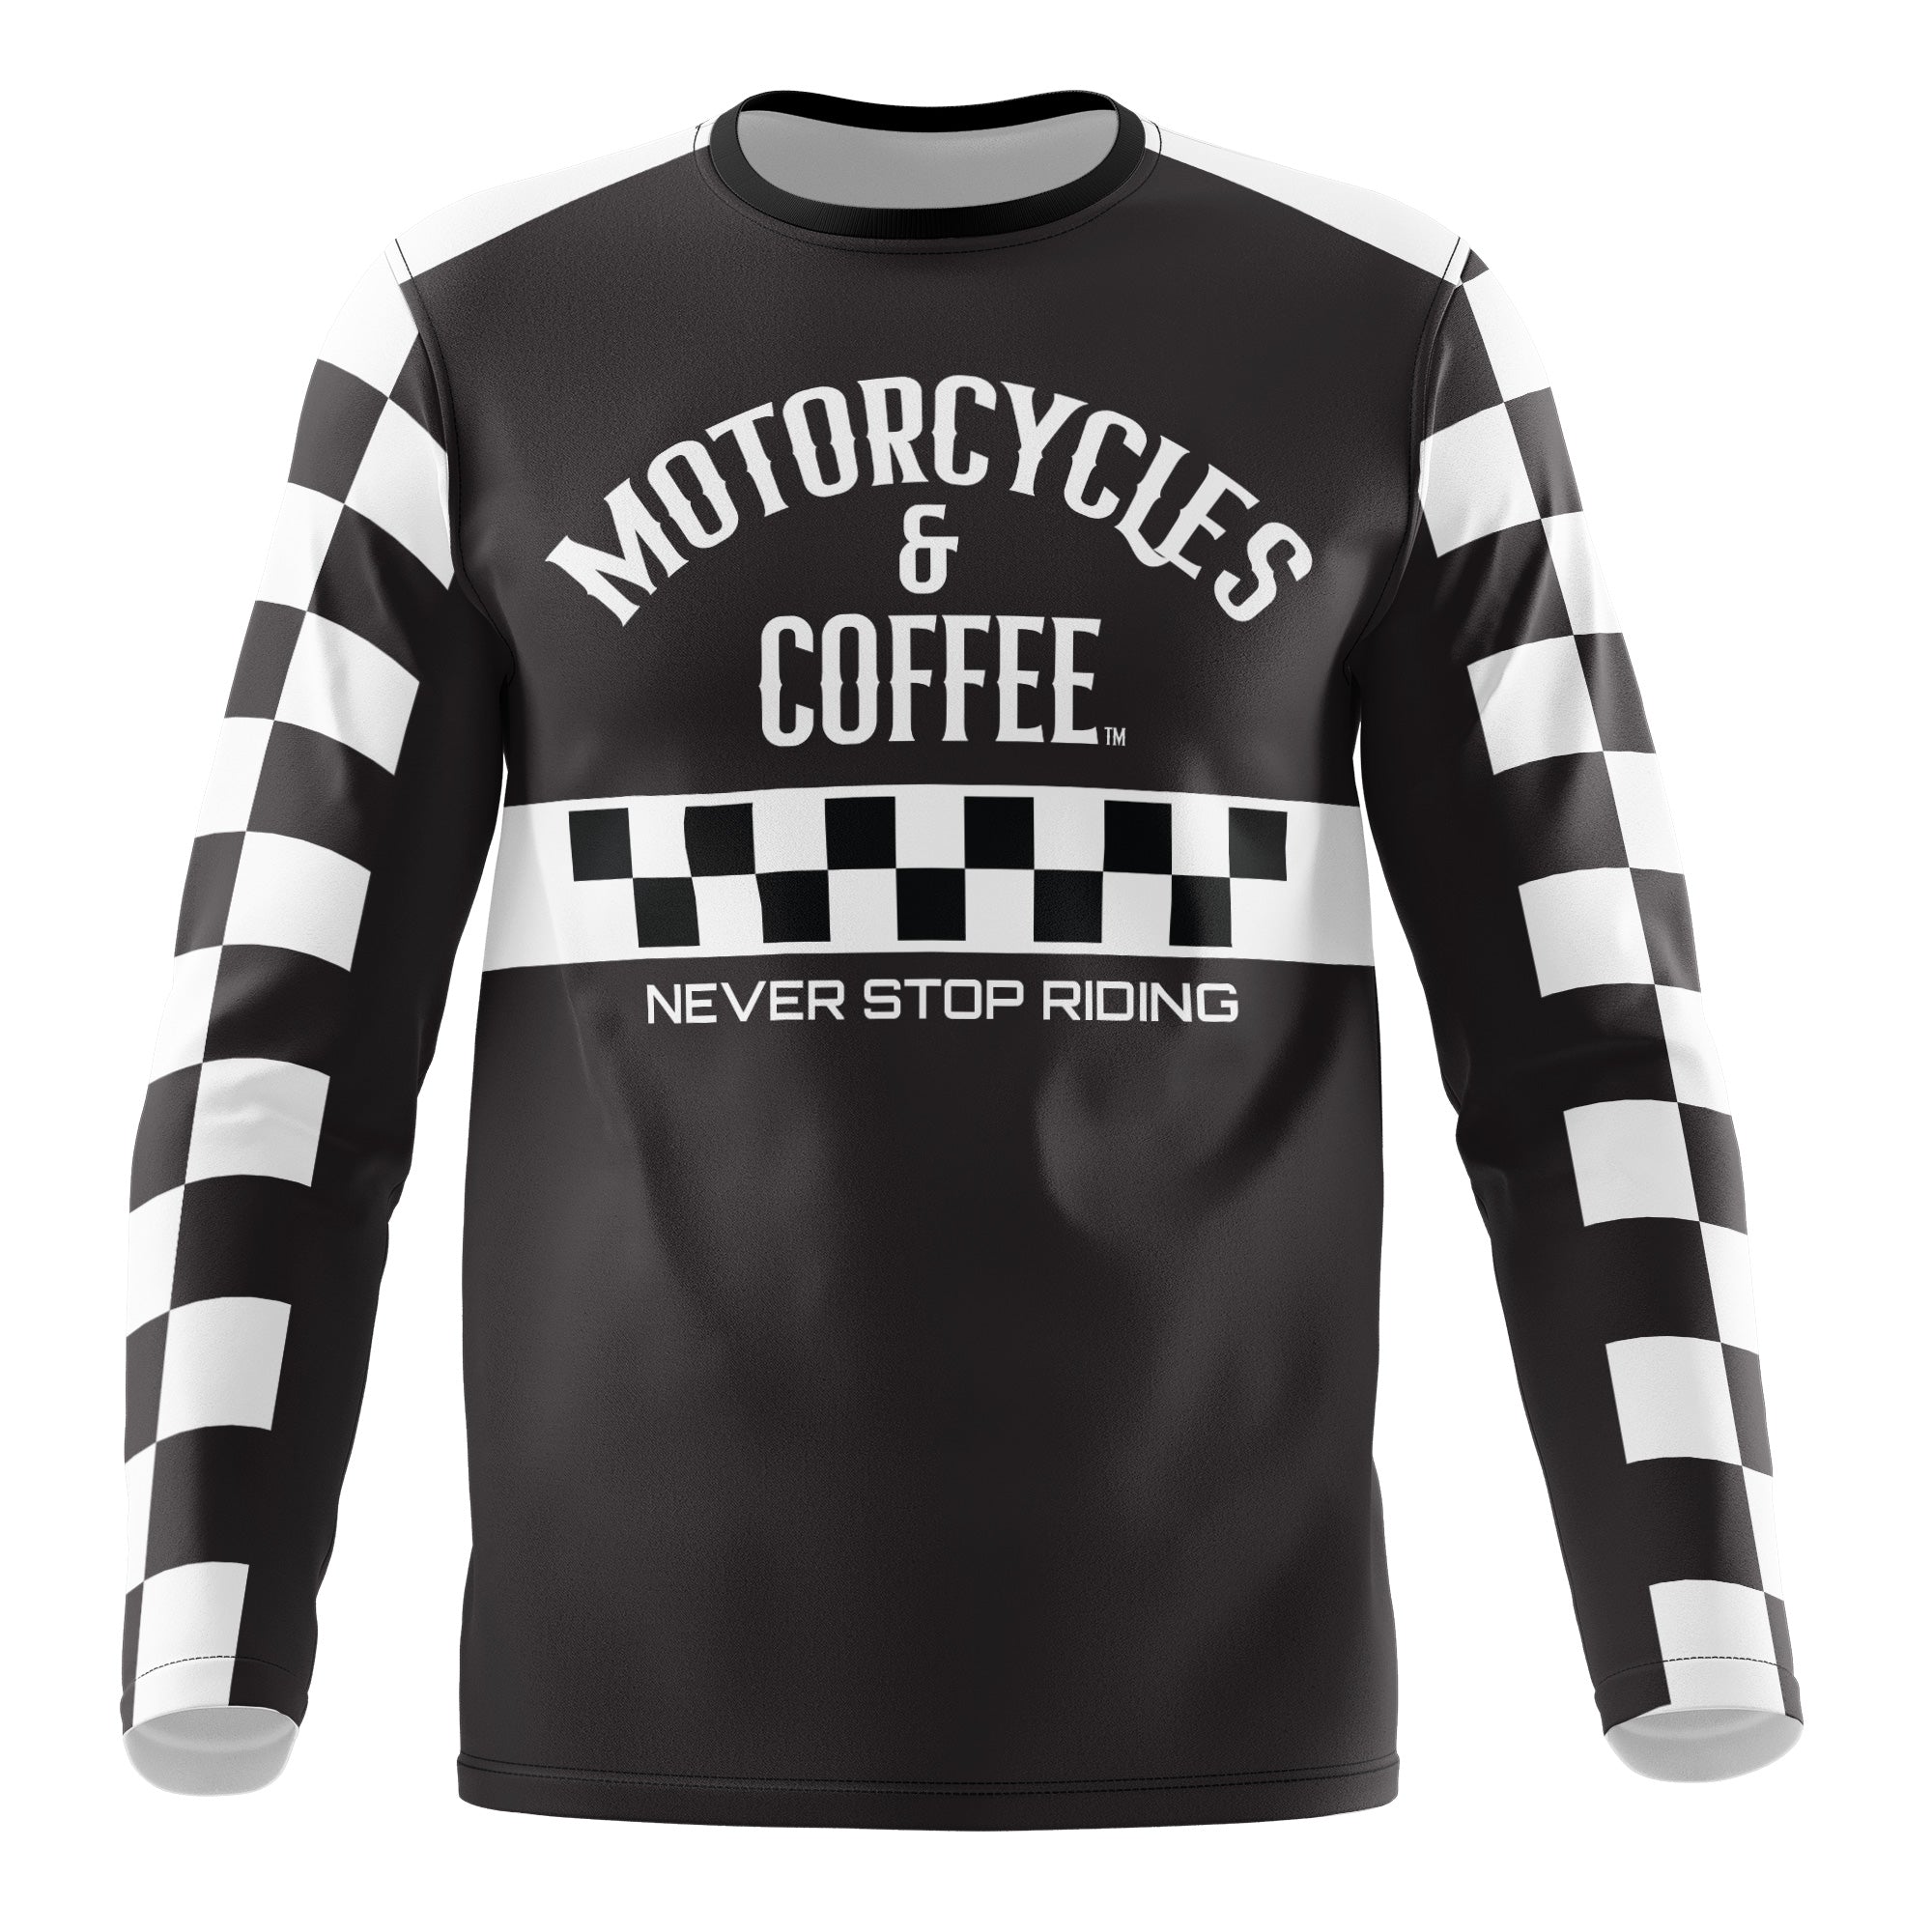 Cafe Checkers - Vintage Jersey